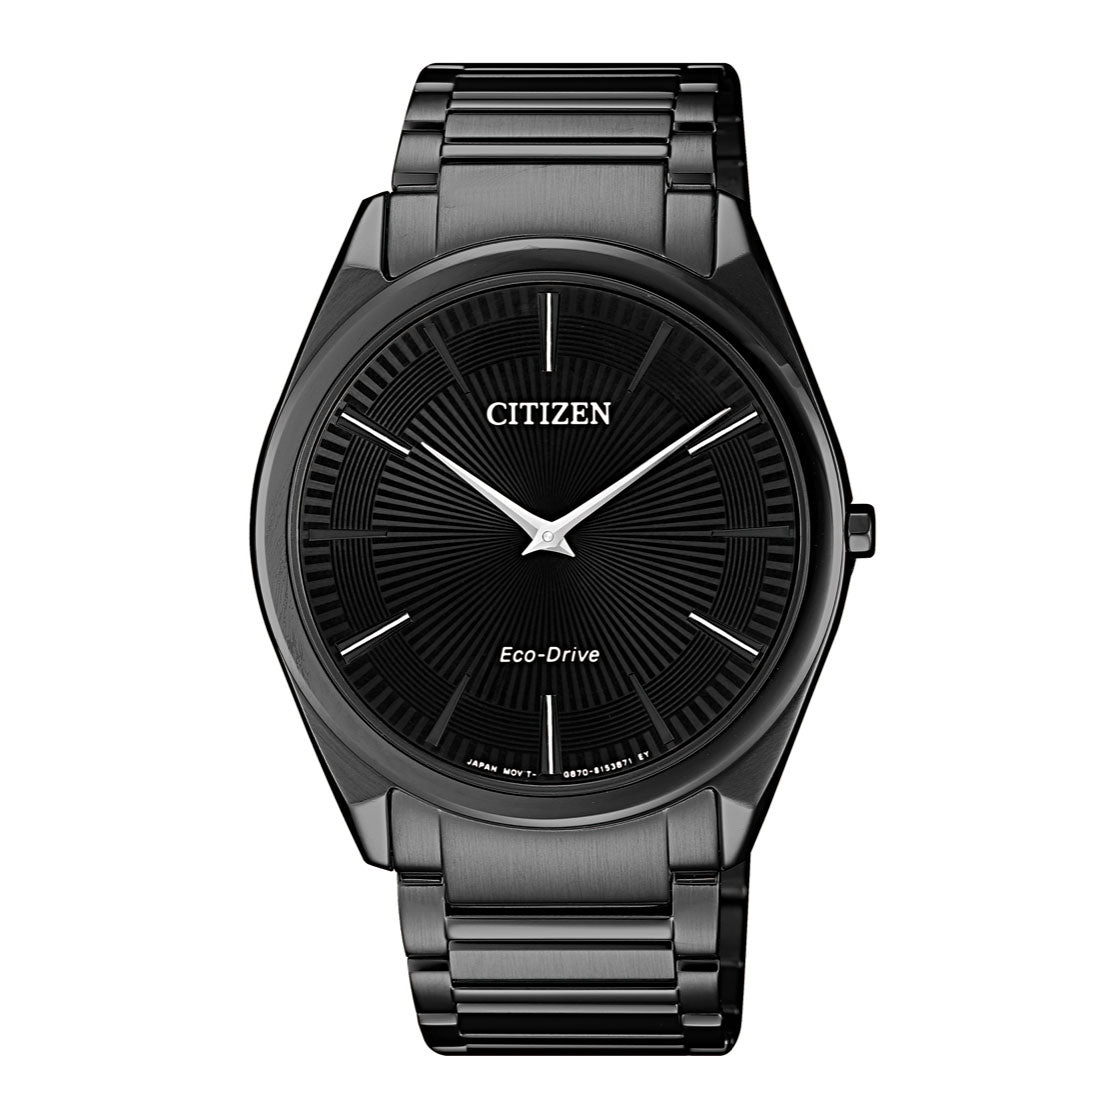 Citizen Men's Watch with Optical Powered Movement and Black Dial - AR3079-85E